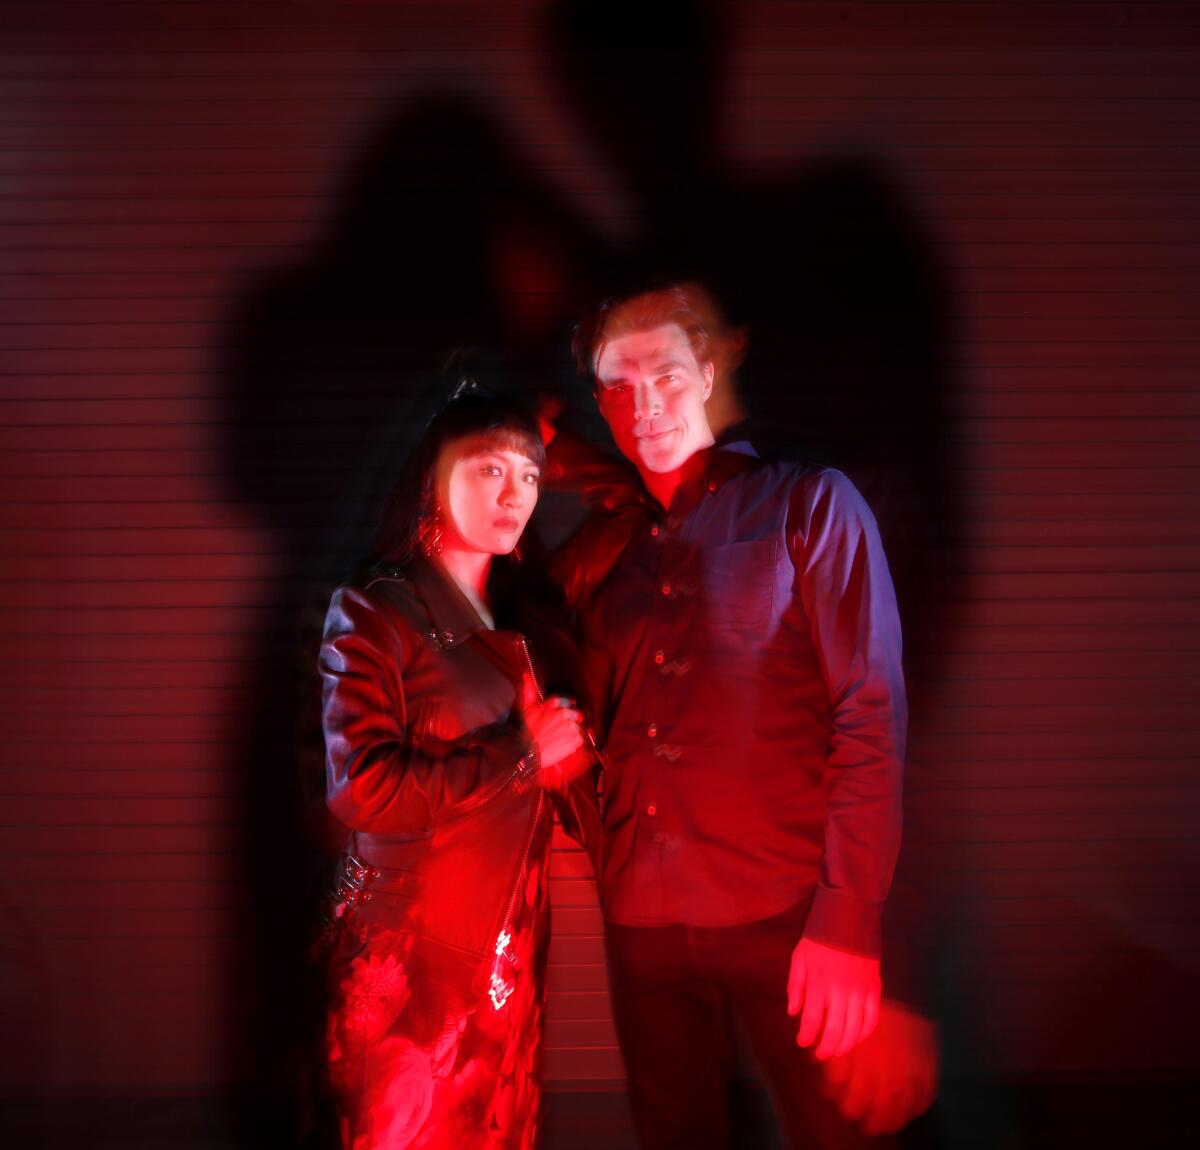 Actors Constance Wu and Finn Wittrock pose in a dim setting, bathed in spooky red light.